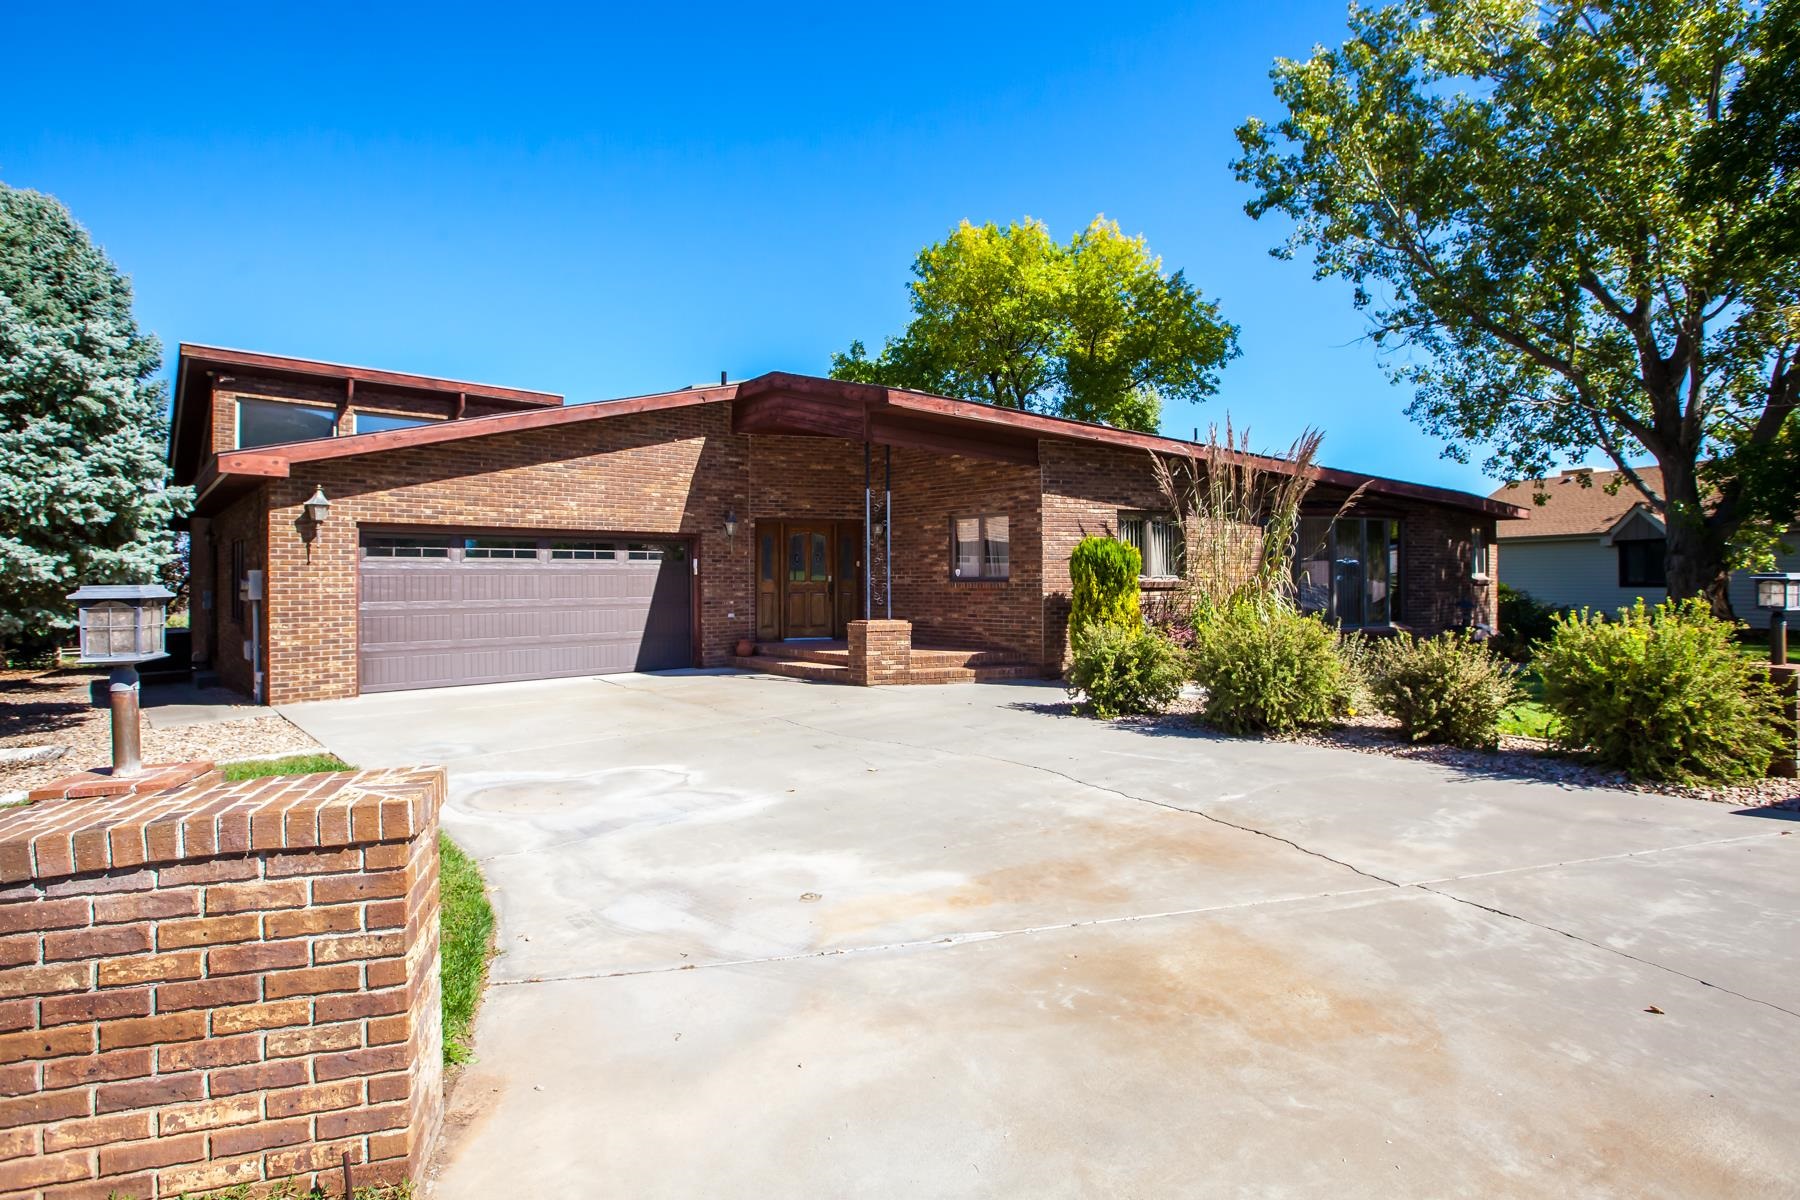 This quality built brick custom home boasts comfort and class with an opportunity to update a few things to reach it's full potential. Look out the large back windows onto the fairway of hole 6 at Tiara Rado Golf Course and see the city lights at night. Out the front windows you'll get views that are literally 'Monumental'. At just over 3,700 sq ft finished, there's potential to add even more finished space in the basement. Park the golf cart in the basement down a ramp with an overhead door. This property is close to hiking, biking and rafting opportunities while only being a few minutes from shopping, restaurants and other amenities. All furnishings can stay.   Laundry hook ups in upper lever bedroom as well.